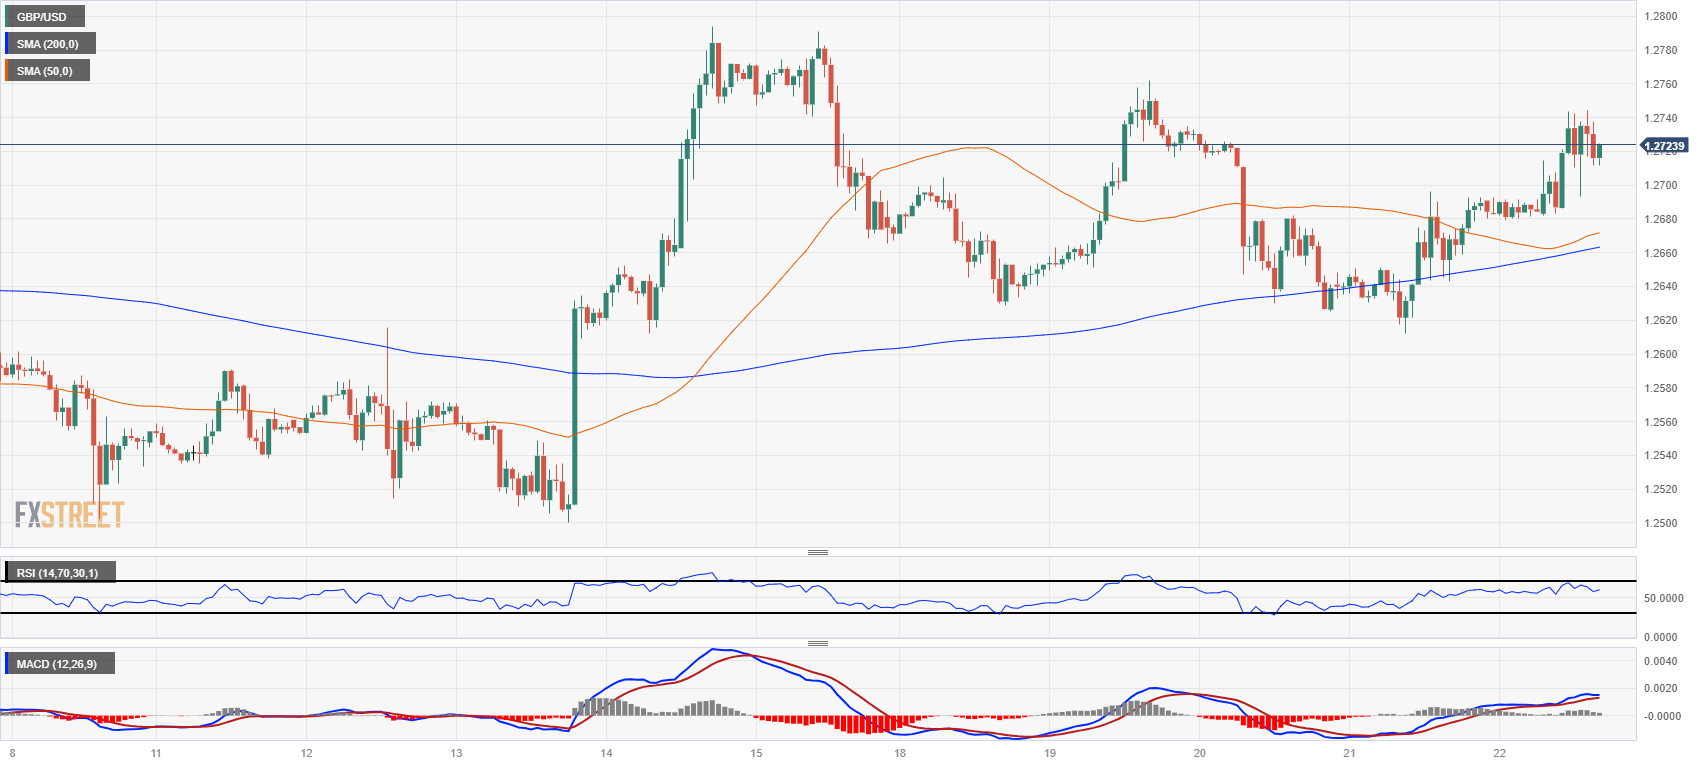 Pound Sterling Price News and Forecast: GBP/USD holding above 1.2700